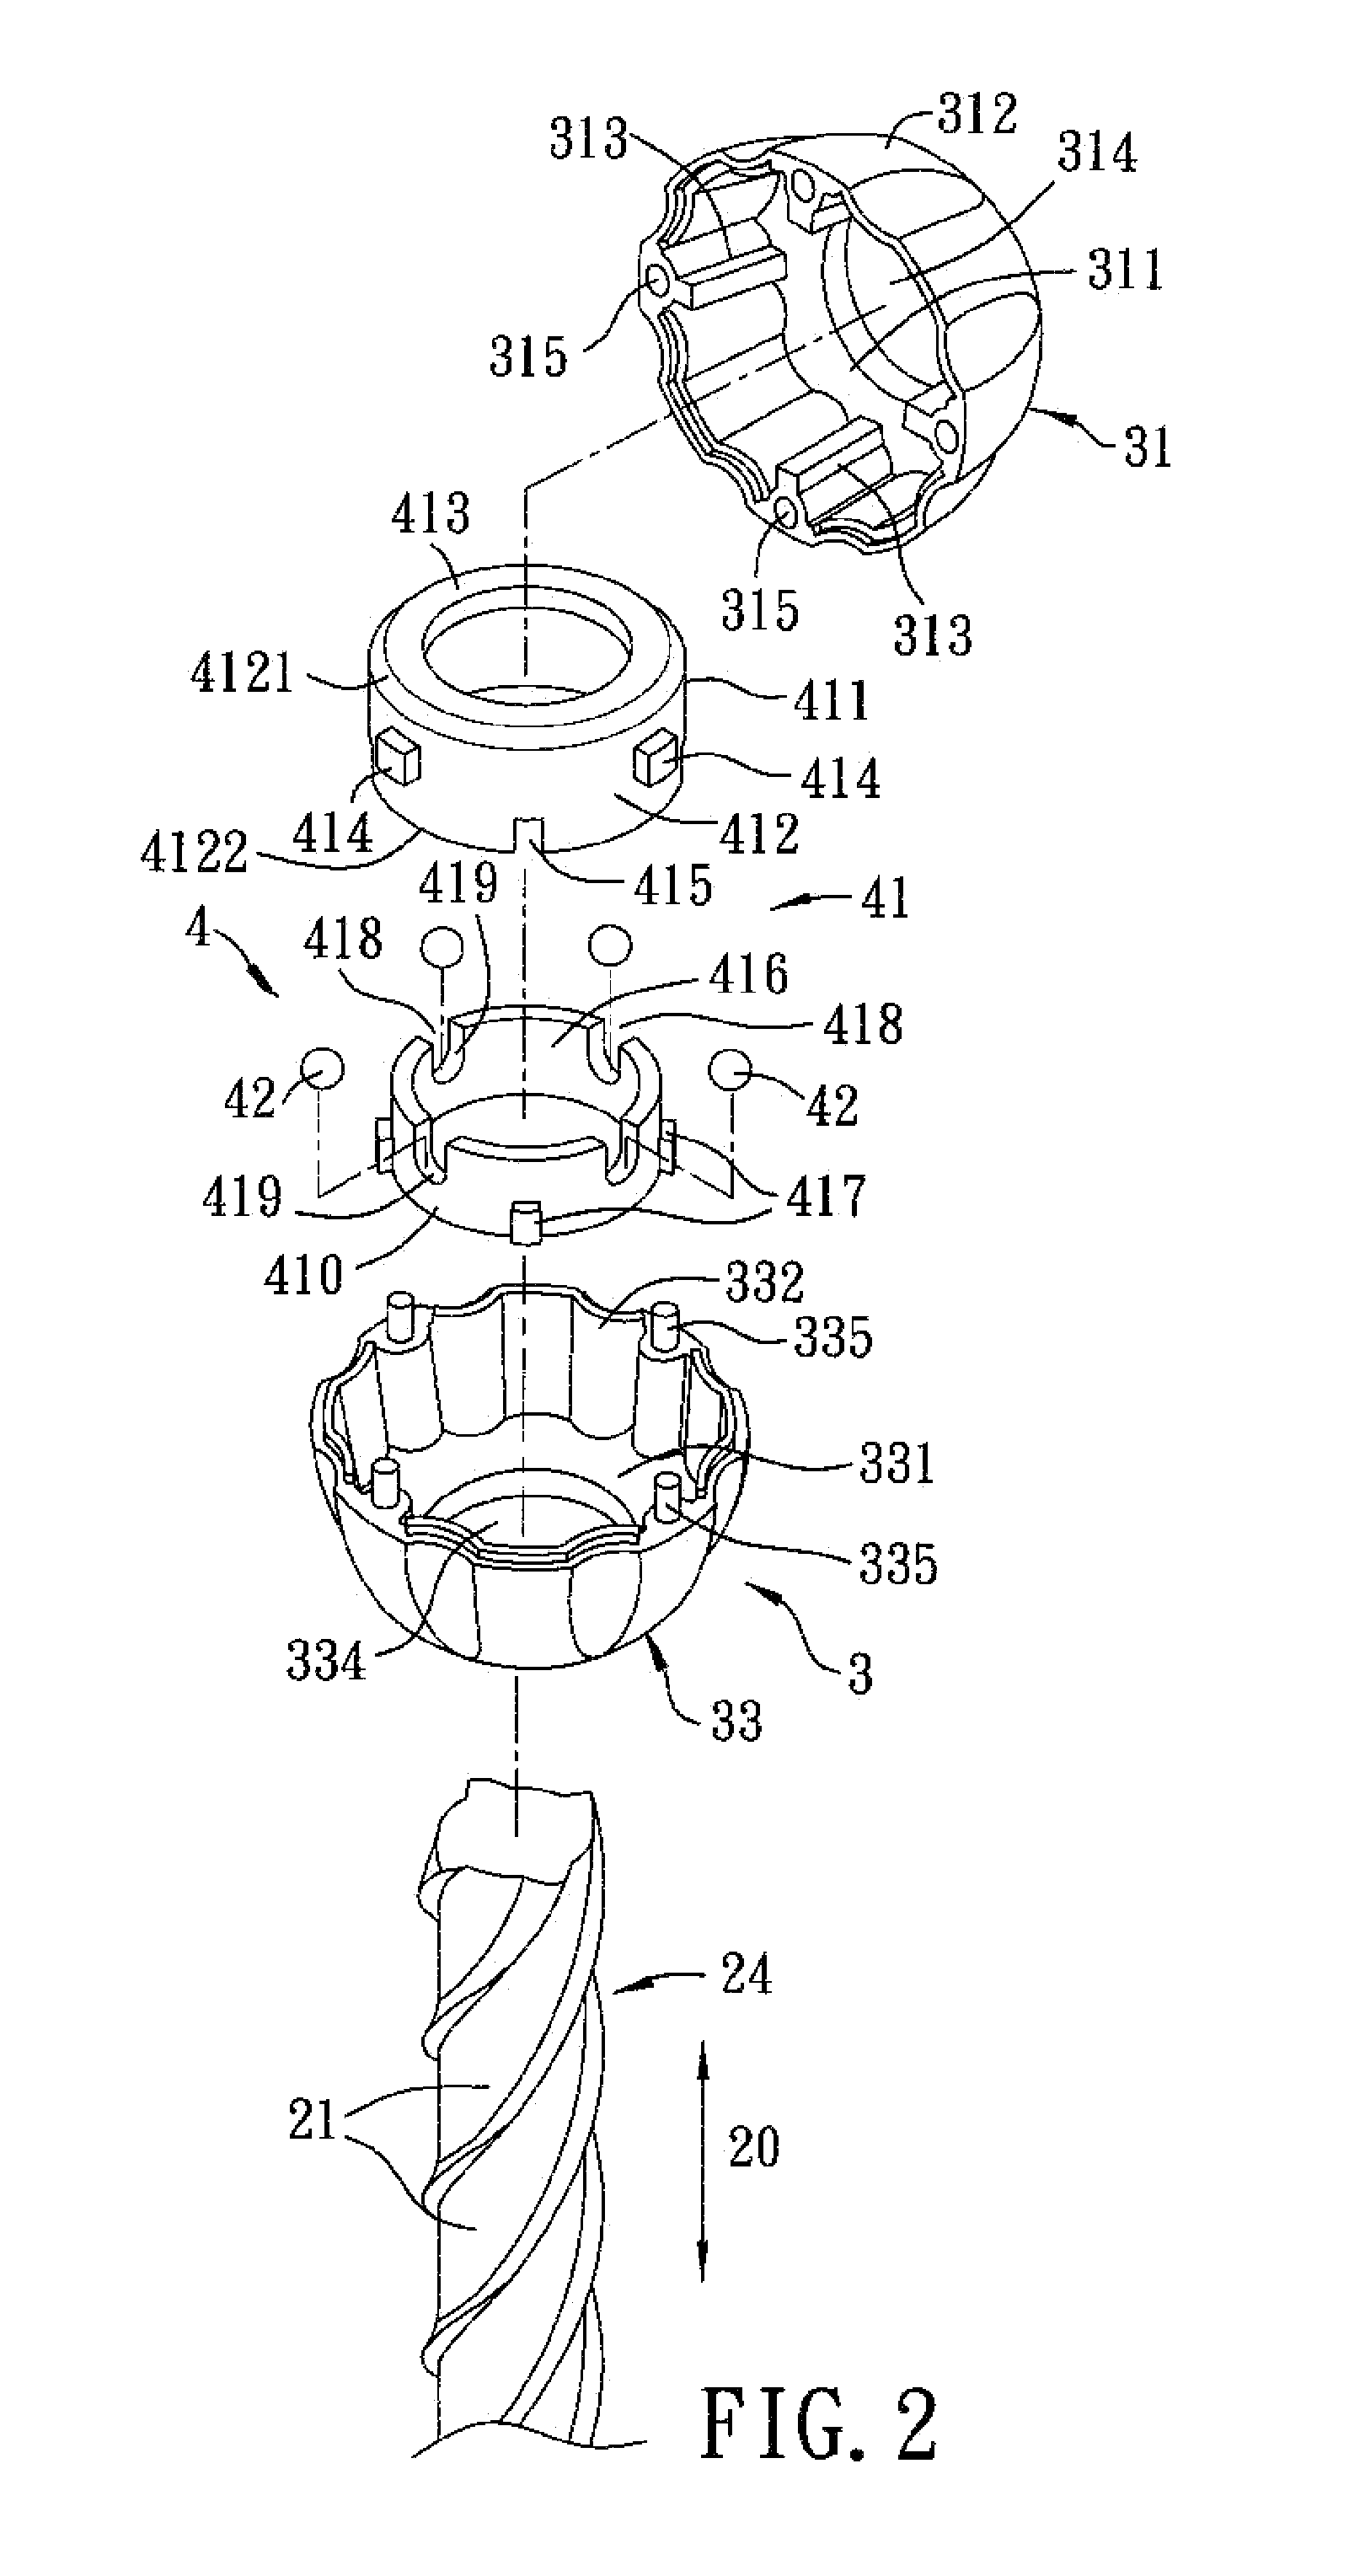 Operating device for rotating a winding roller of a window blind